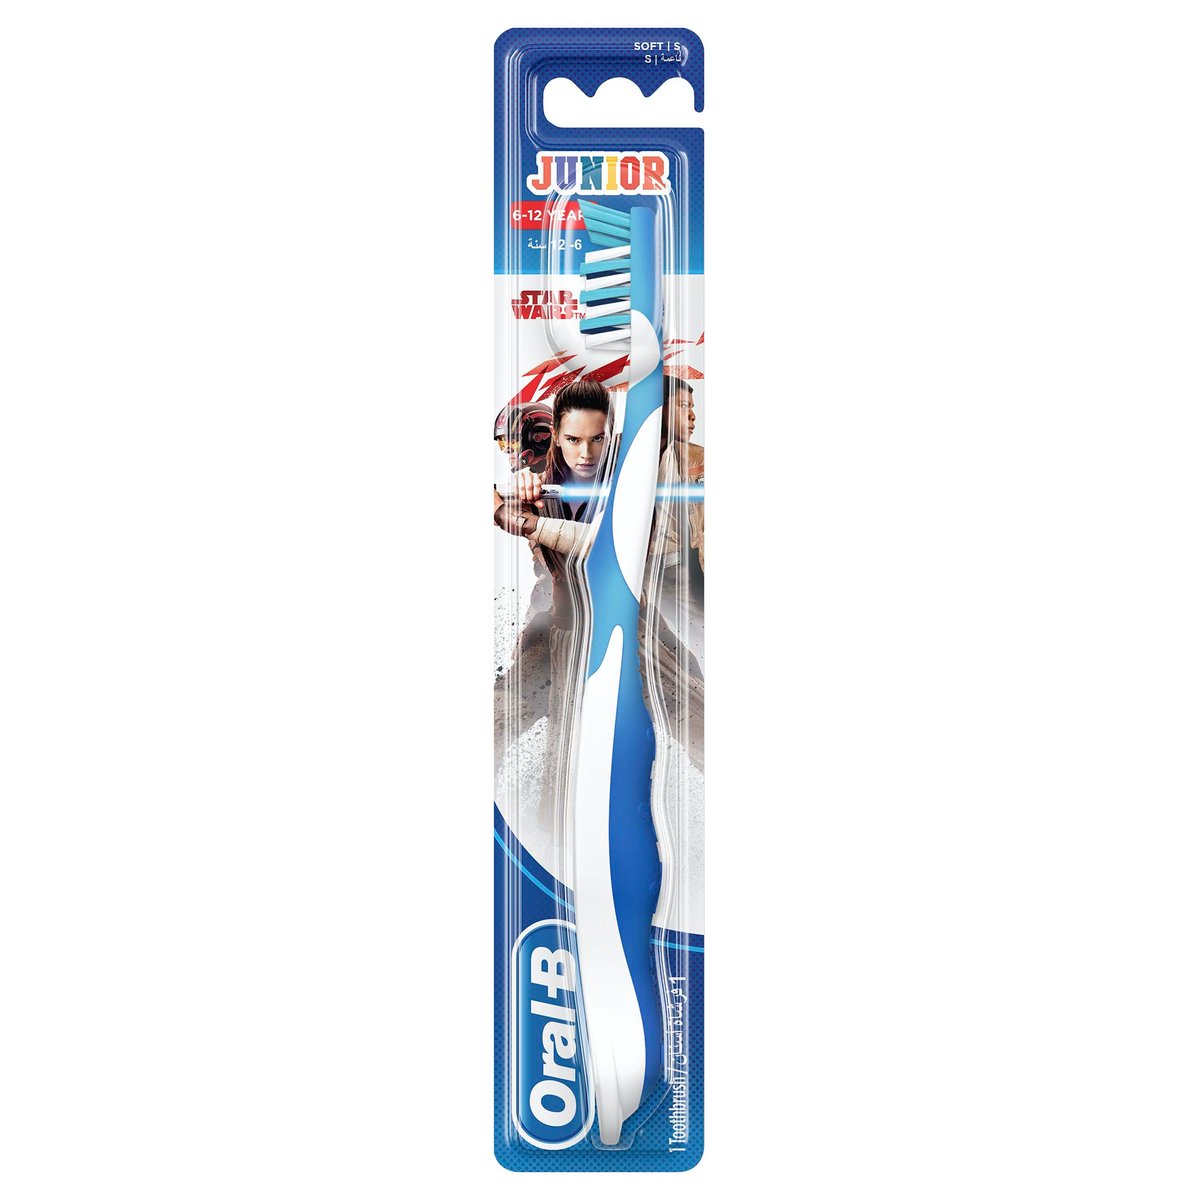 Oral-B Star Wars Junior Manual Toothbrush 6-12 Years Assorted Color 1 pc